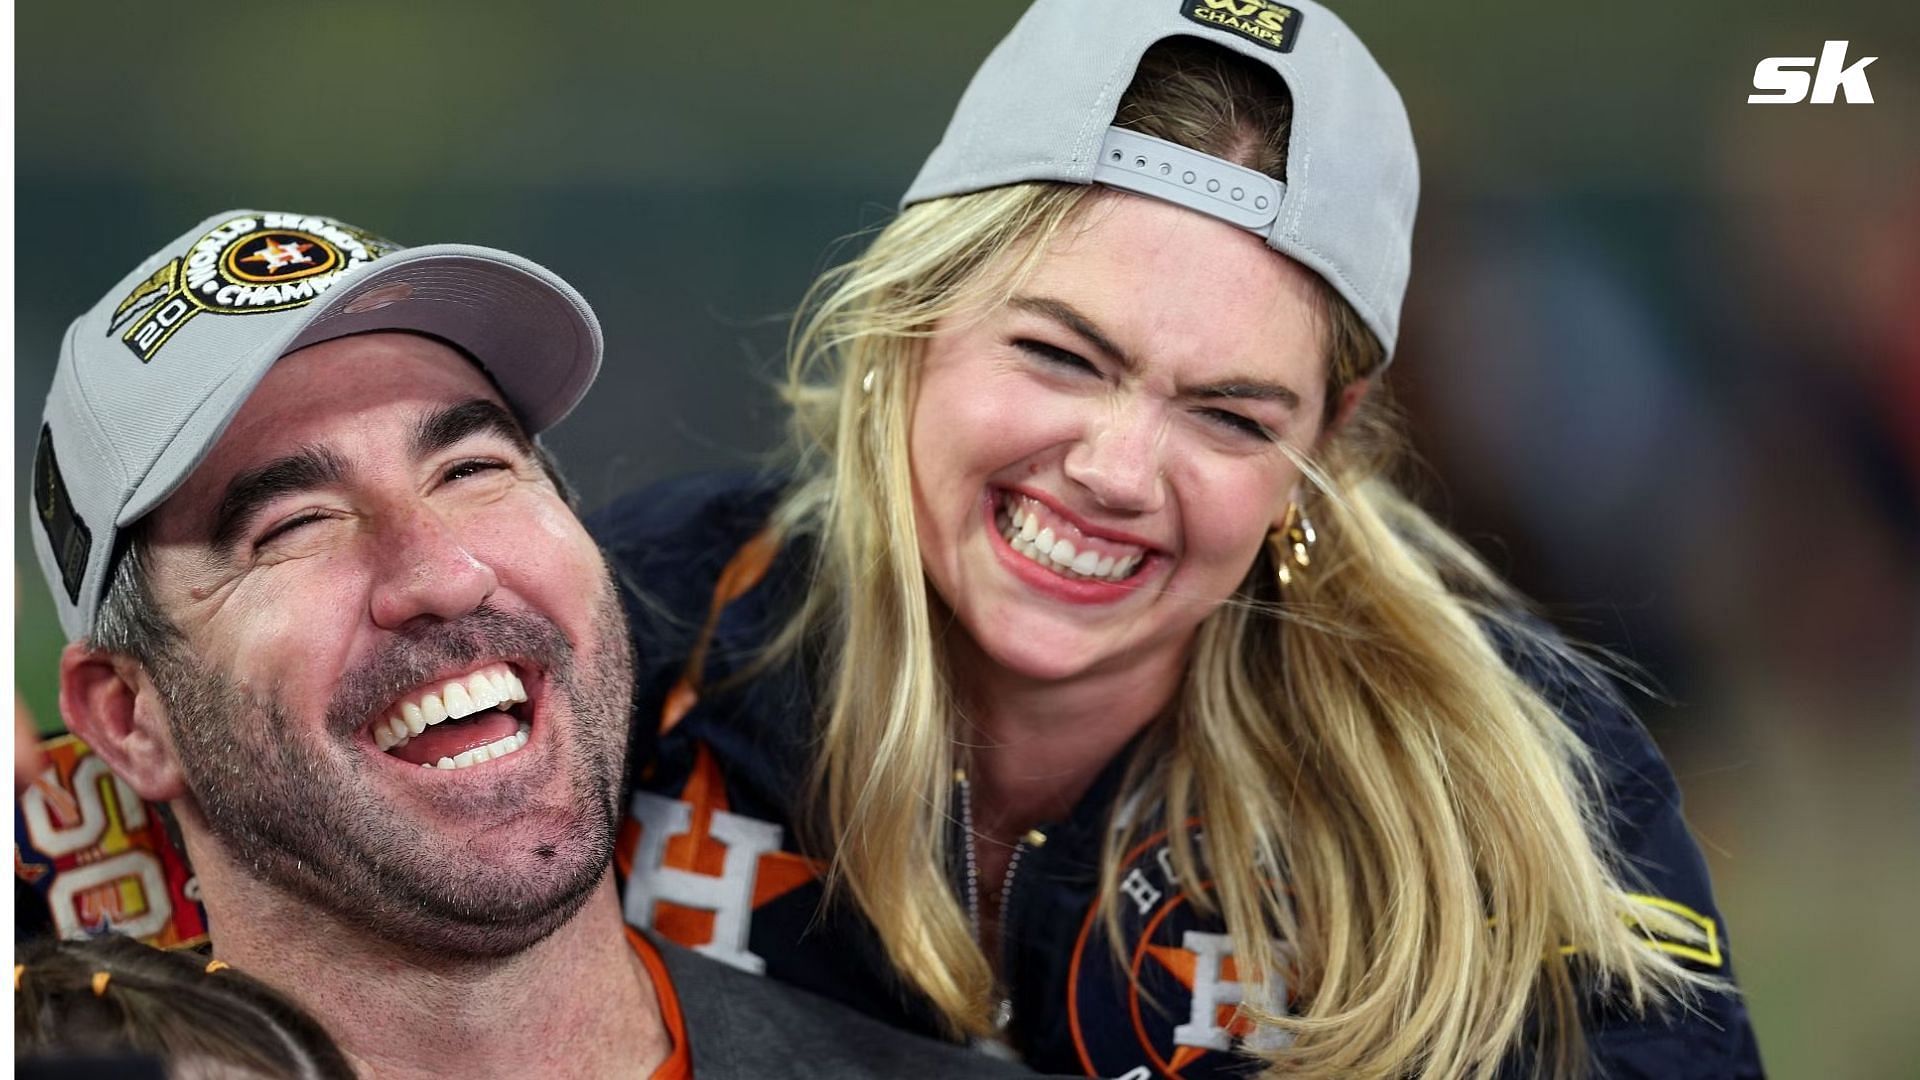 Justin Verlander jokes about coordinating outfits with Kate Upton